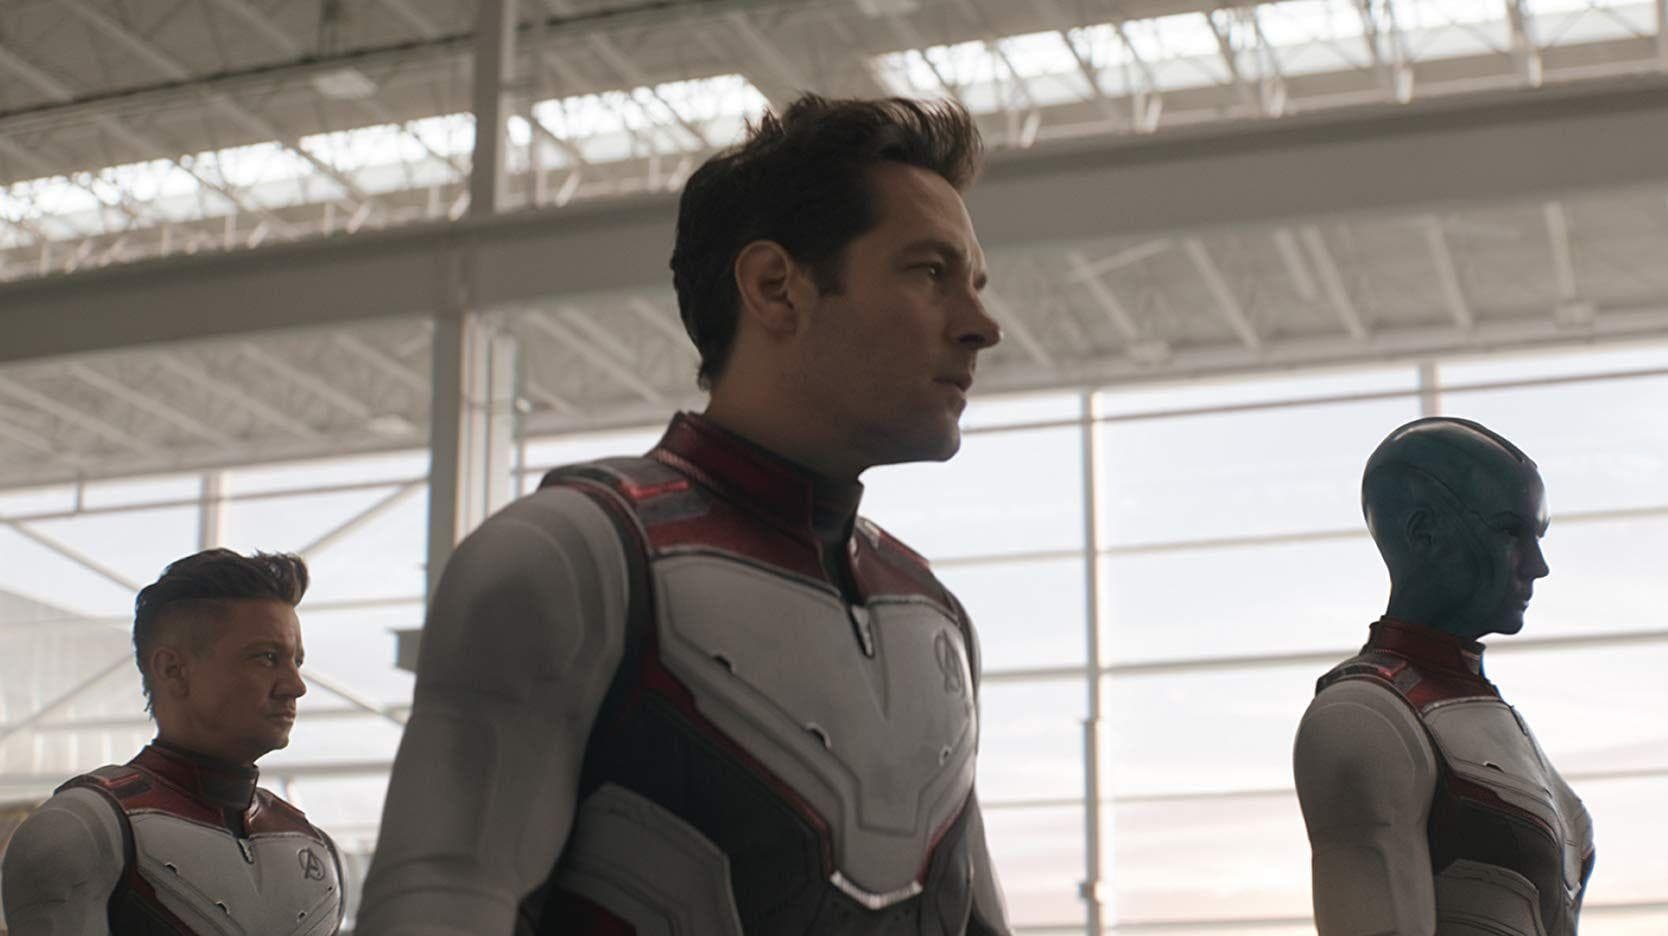 Random Fan Theories About How MCU Will Pull Itself Together And Continue Post-'Endgame'